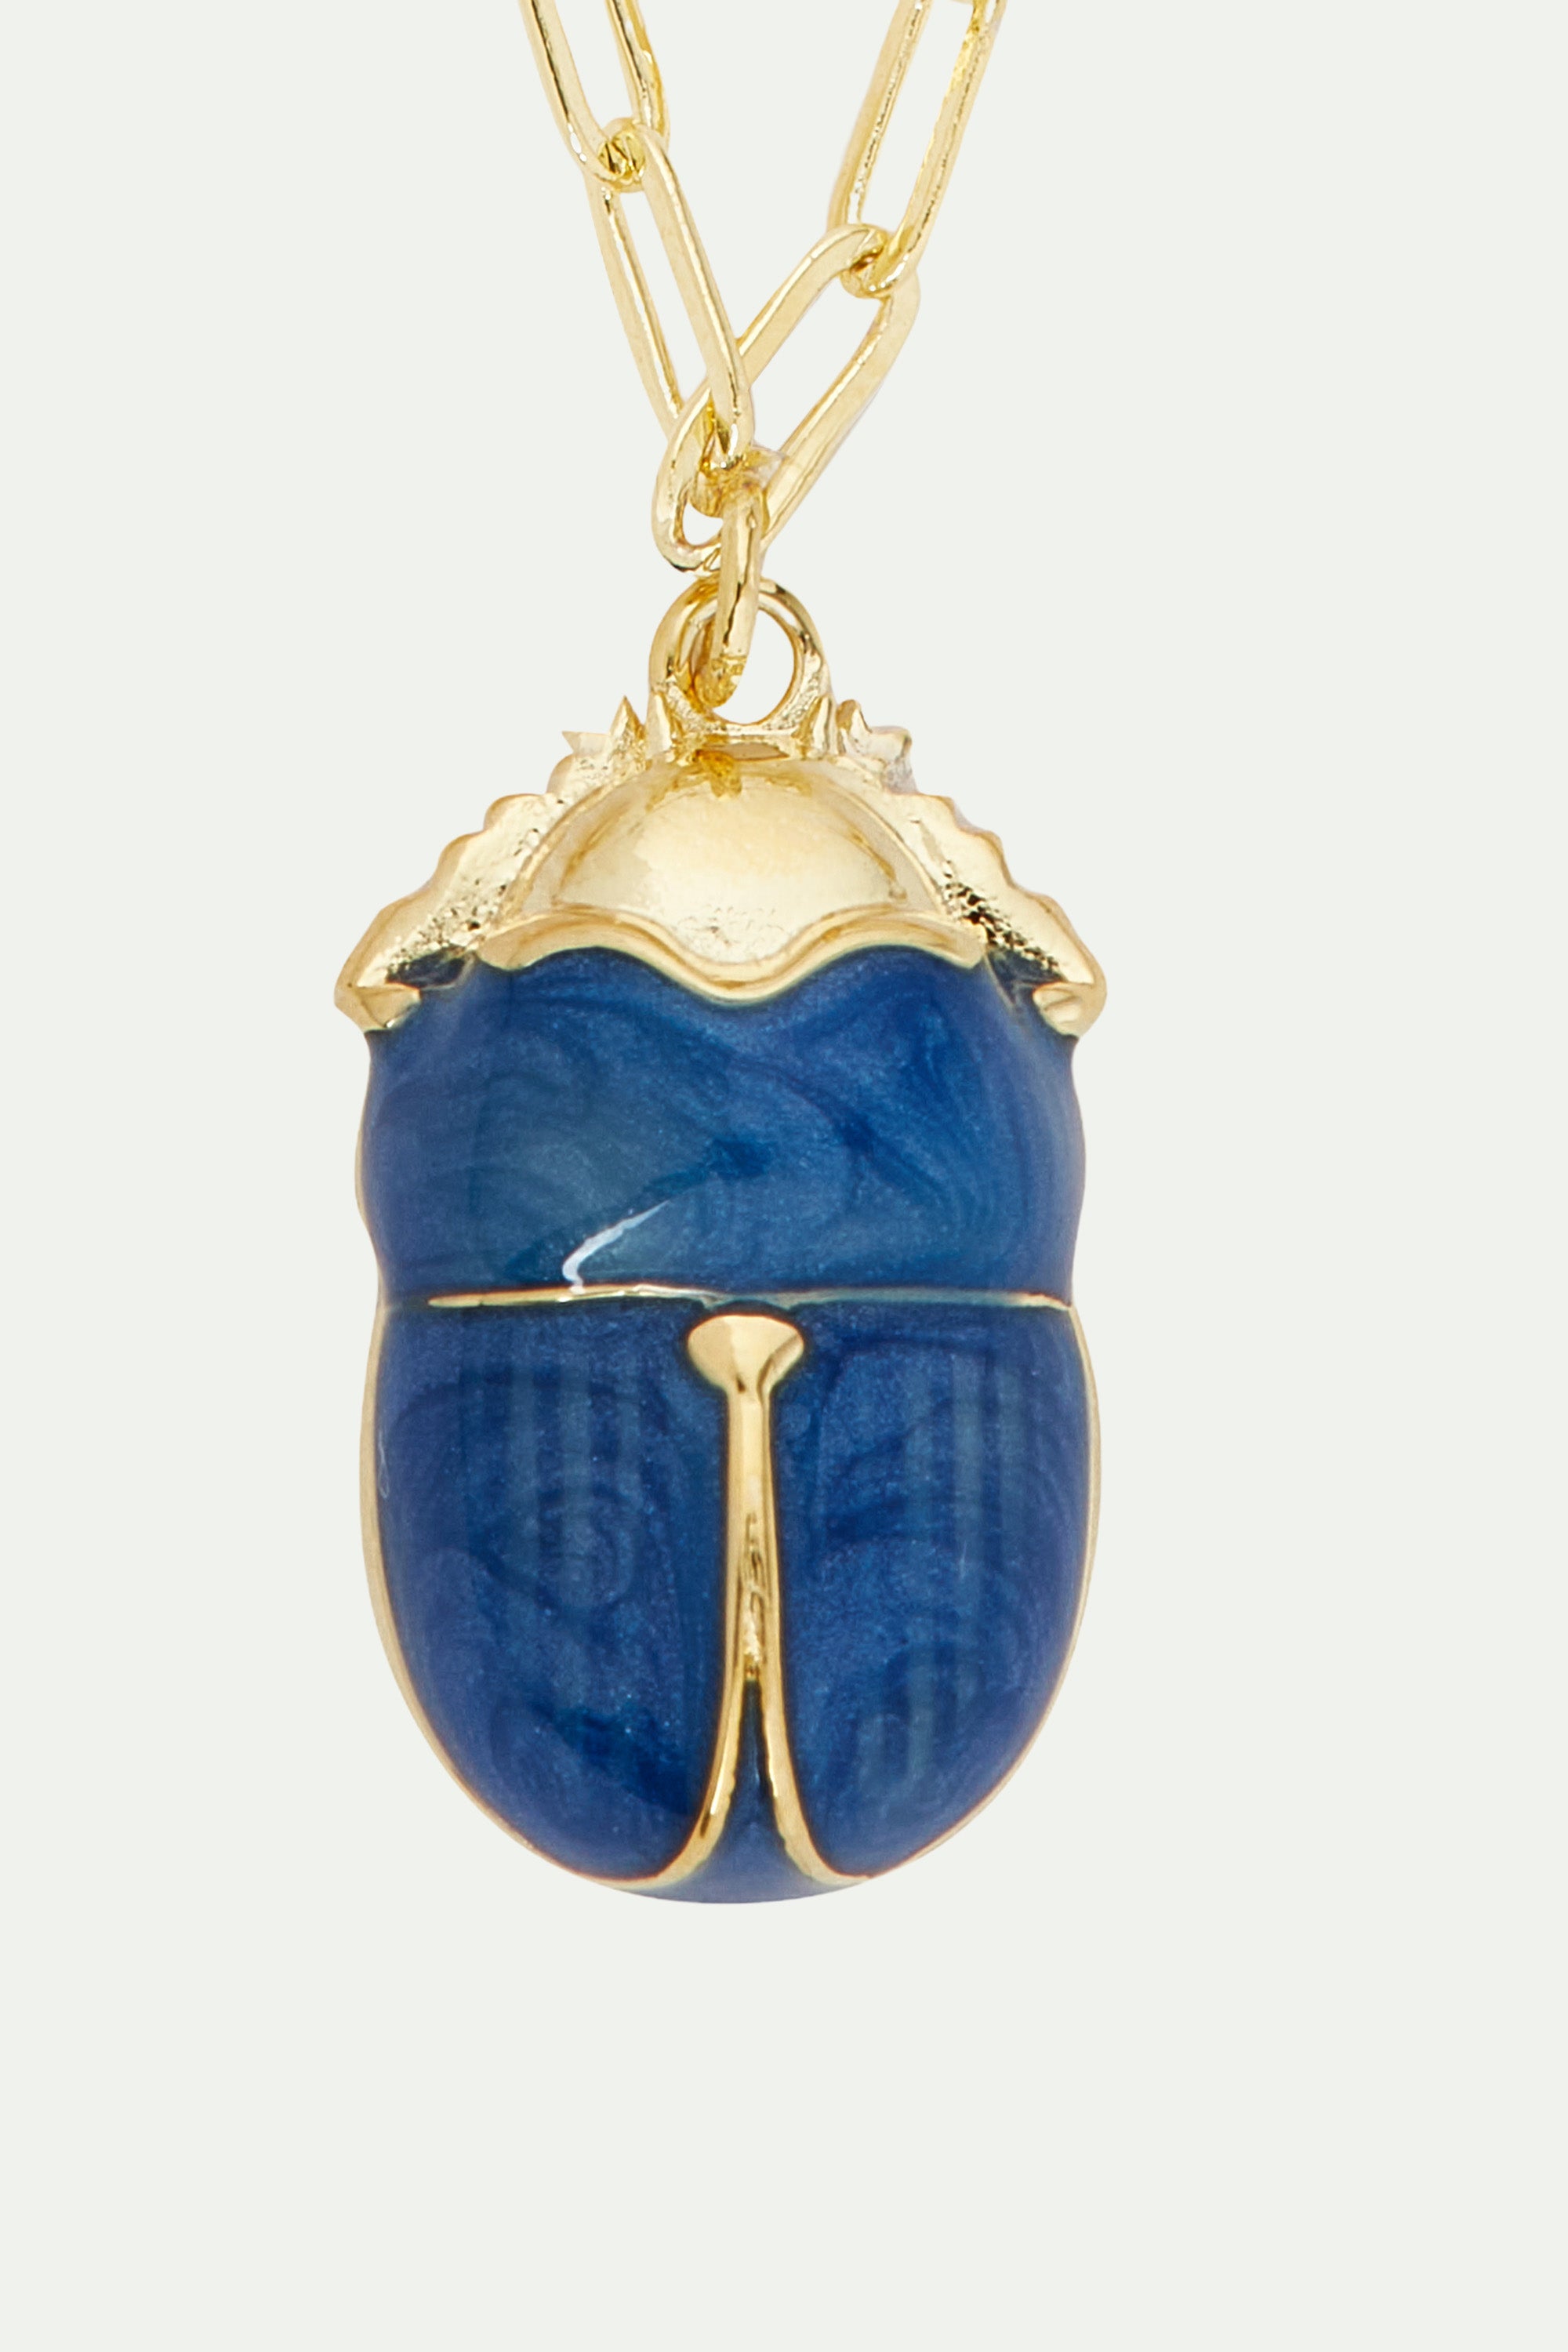 Blue scarab beetle and rectangle link chain necklace